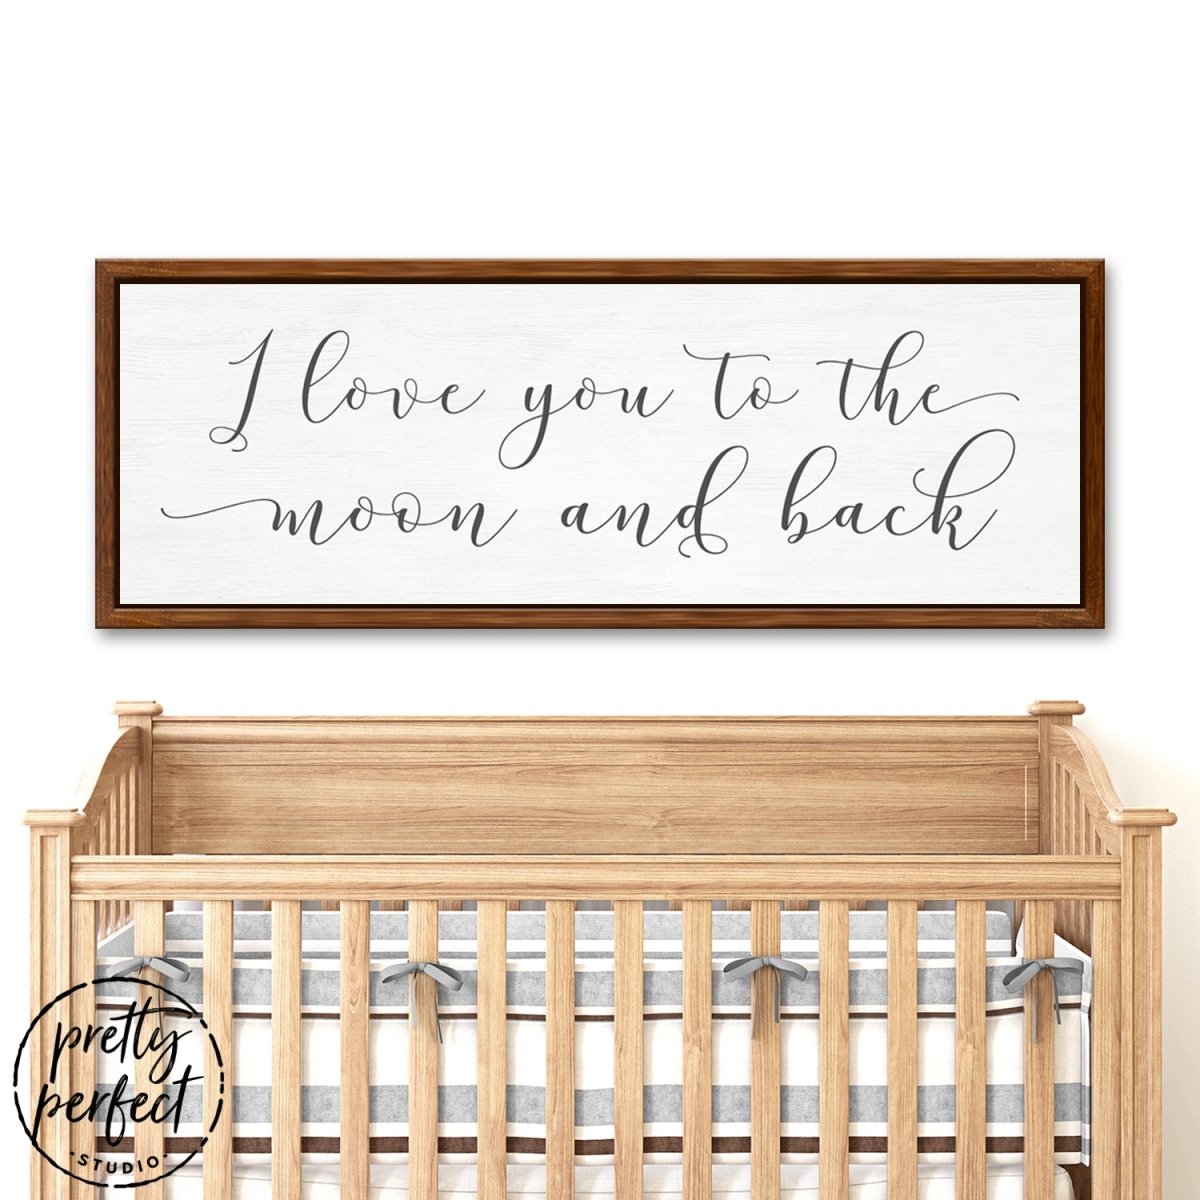 Love You To The Moon And Back Sign Over The Bed - Pretty Perfect Studio